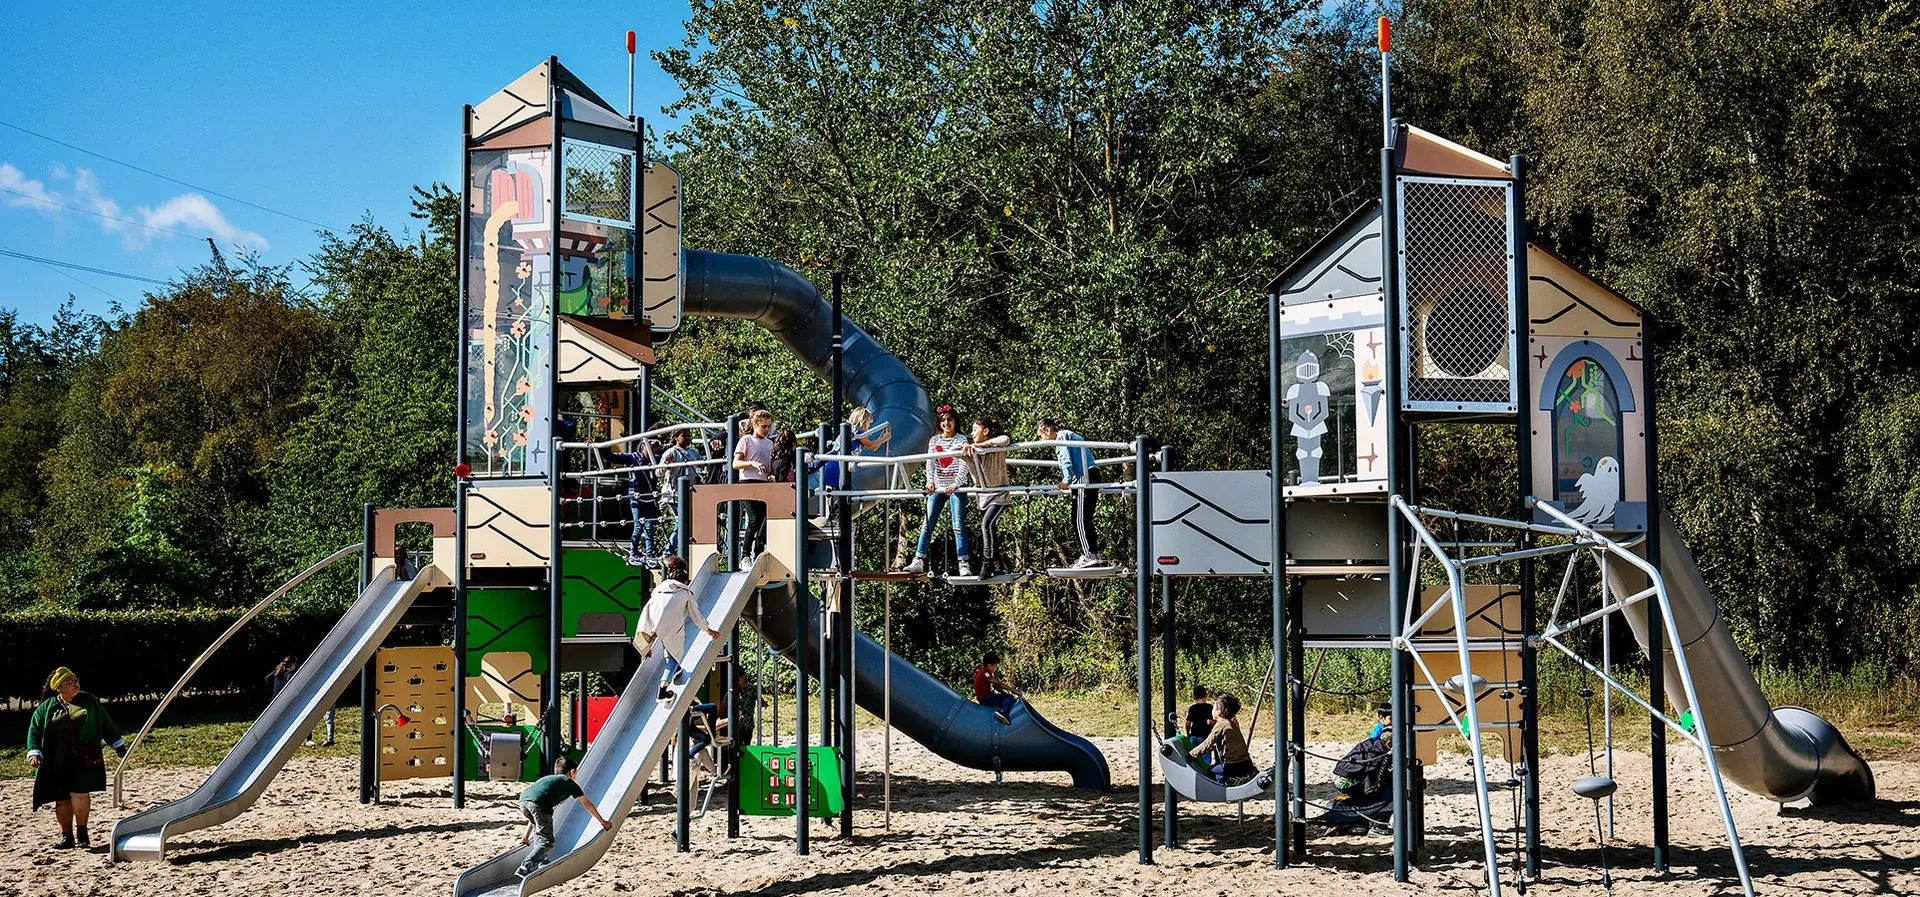 hero image of  large play system in a park with school children playing